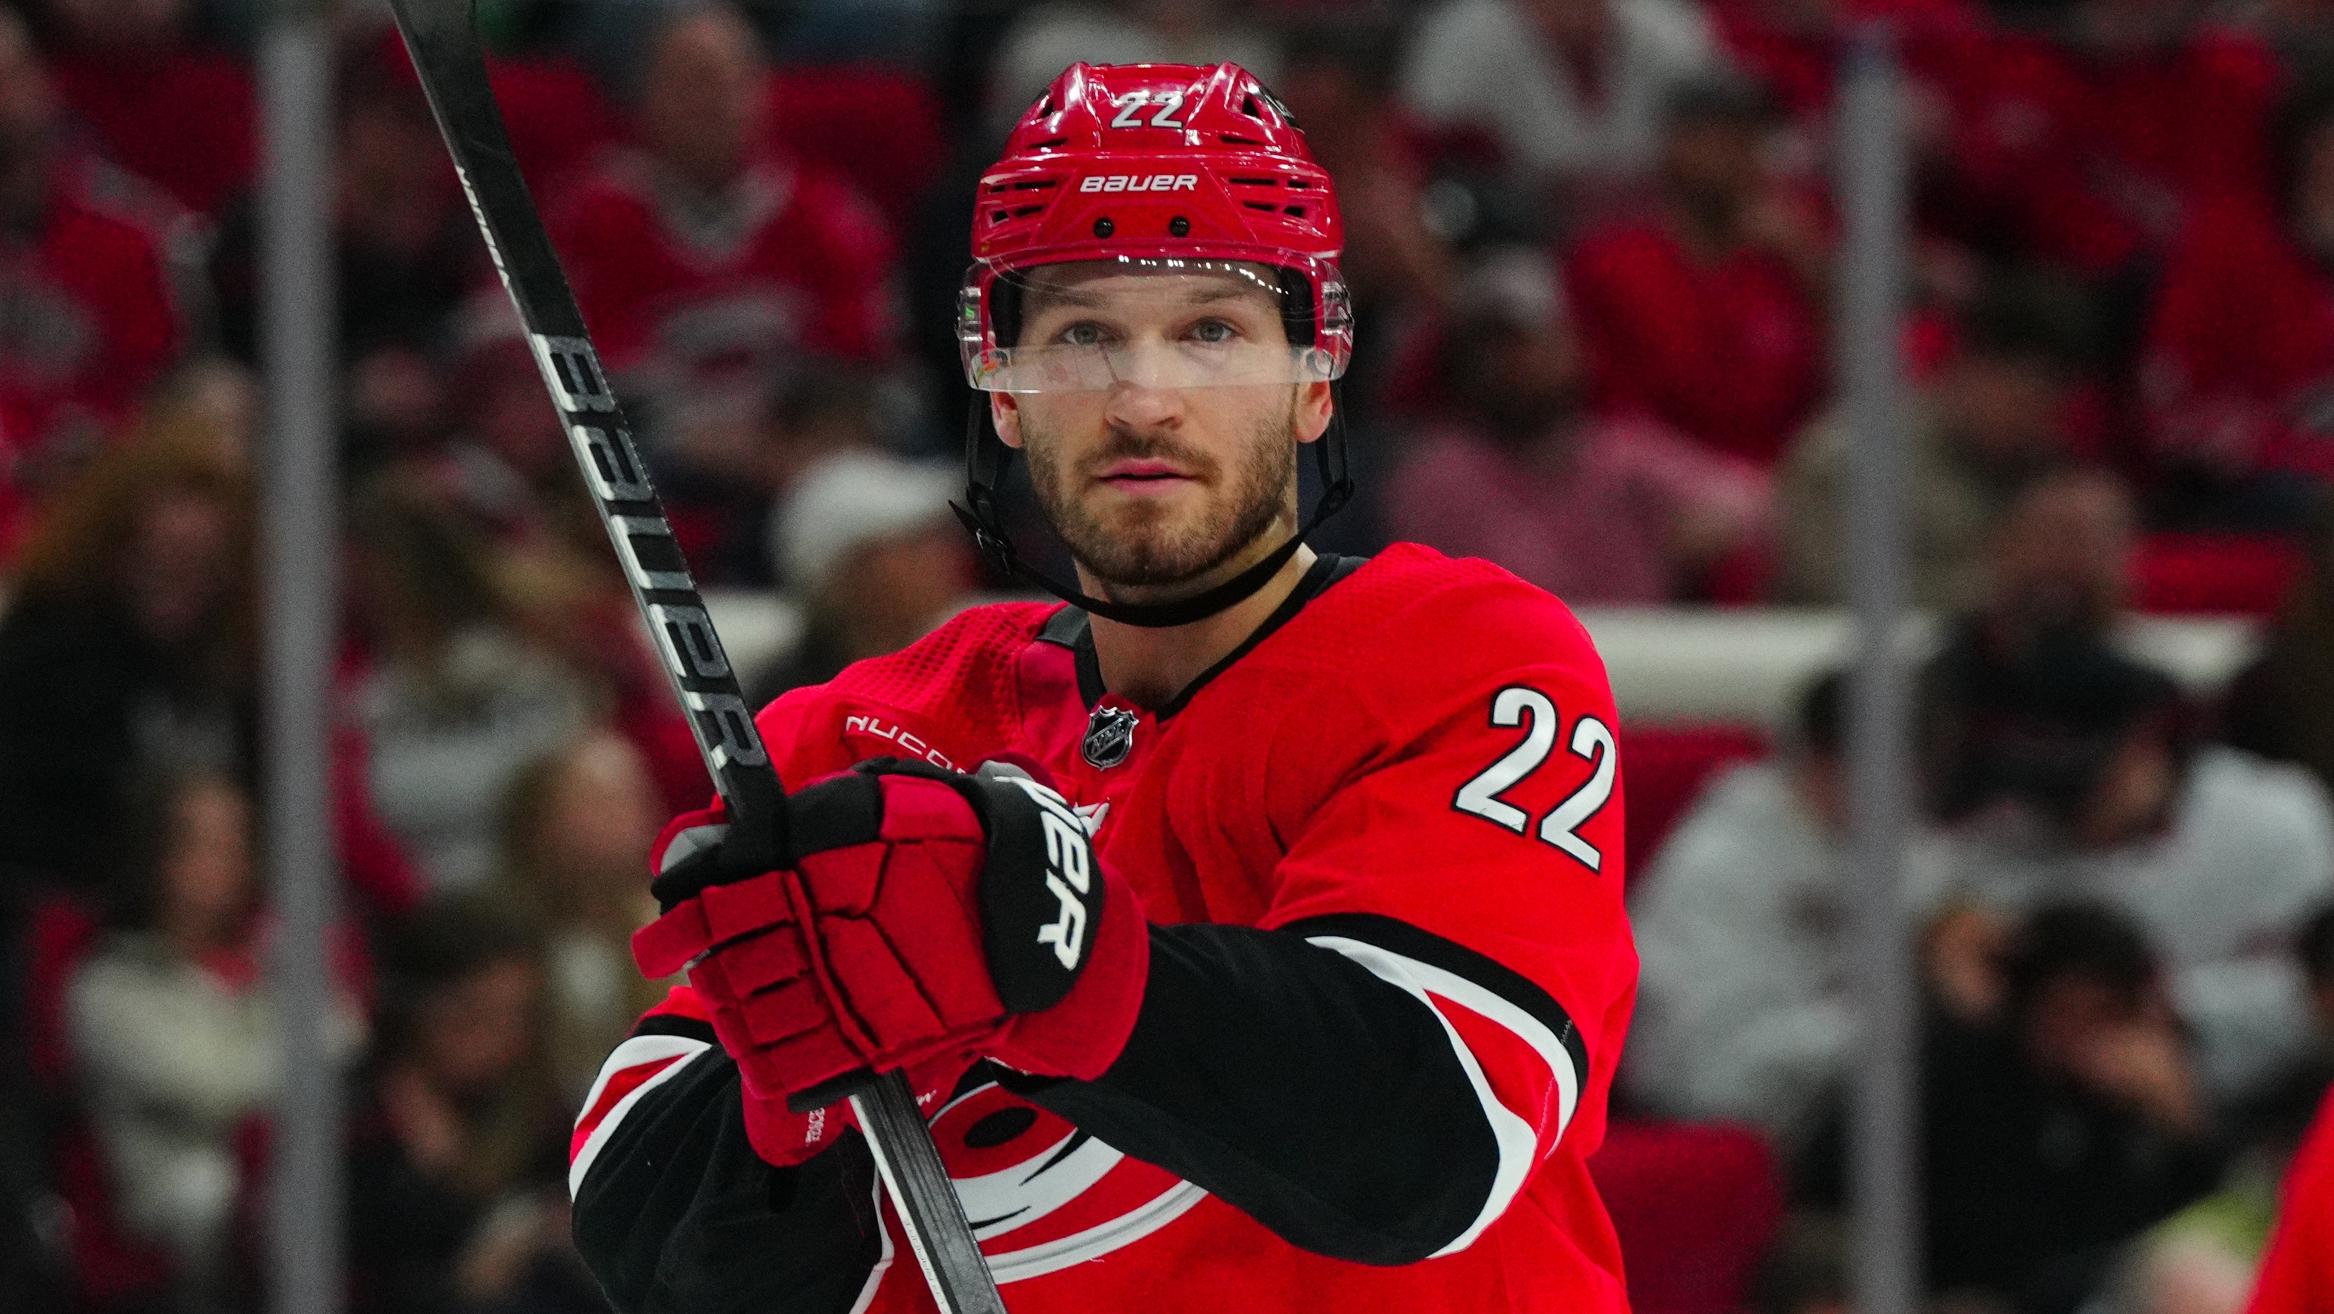 Carolina Hurricanes defenseman Brett Pesce (22) looks on against the Detroit Red Wings during the second period at PNC Arena. / James Guillory - USA TODAY Sports